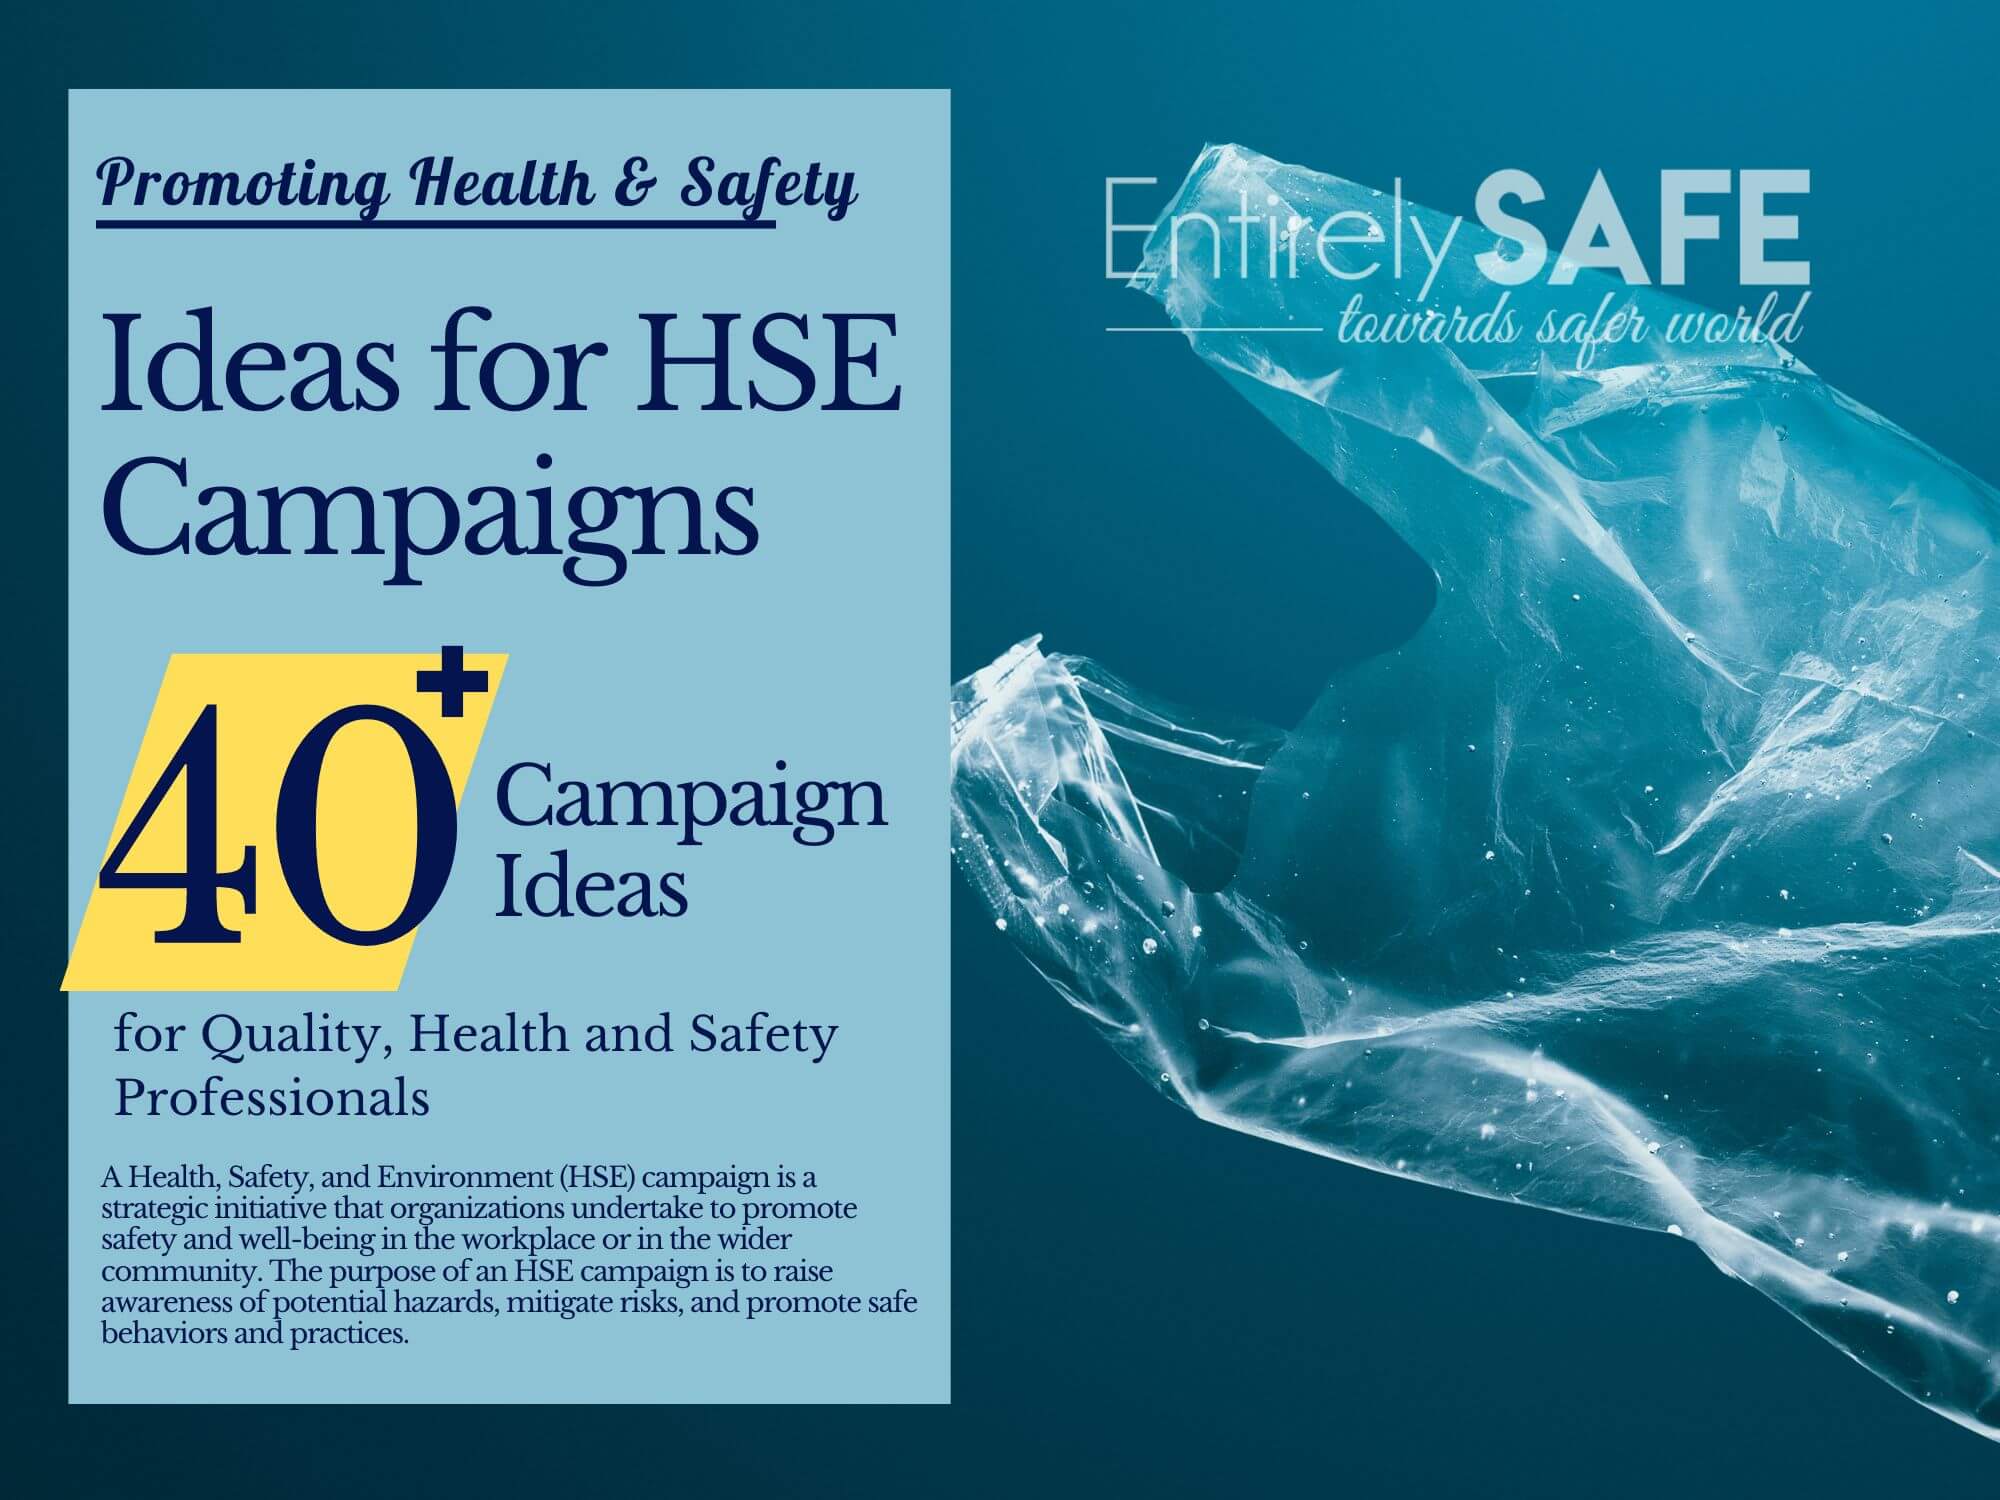 11 Simple Health and Safety Campaigns Ideas to Improve Workplace Safety -  Kee Safety